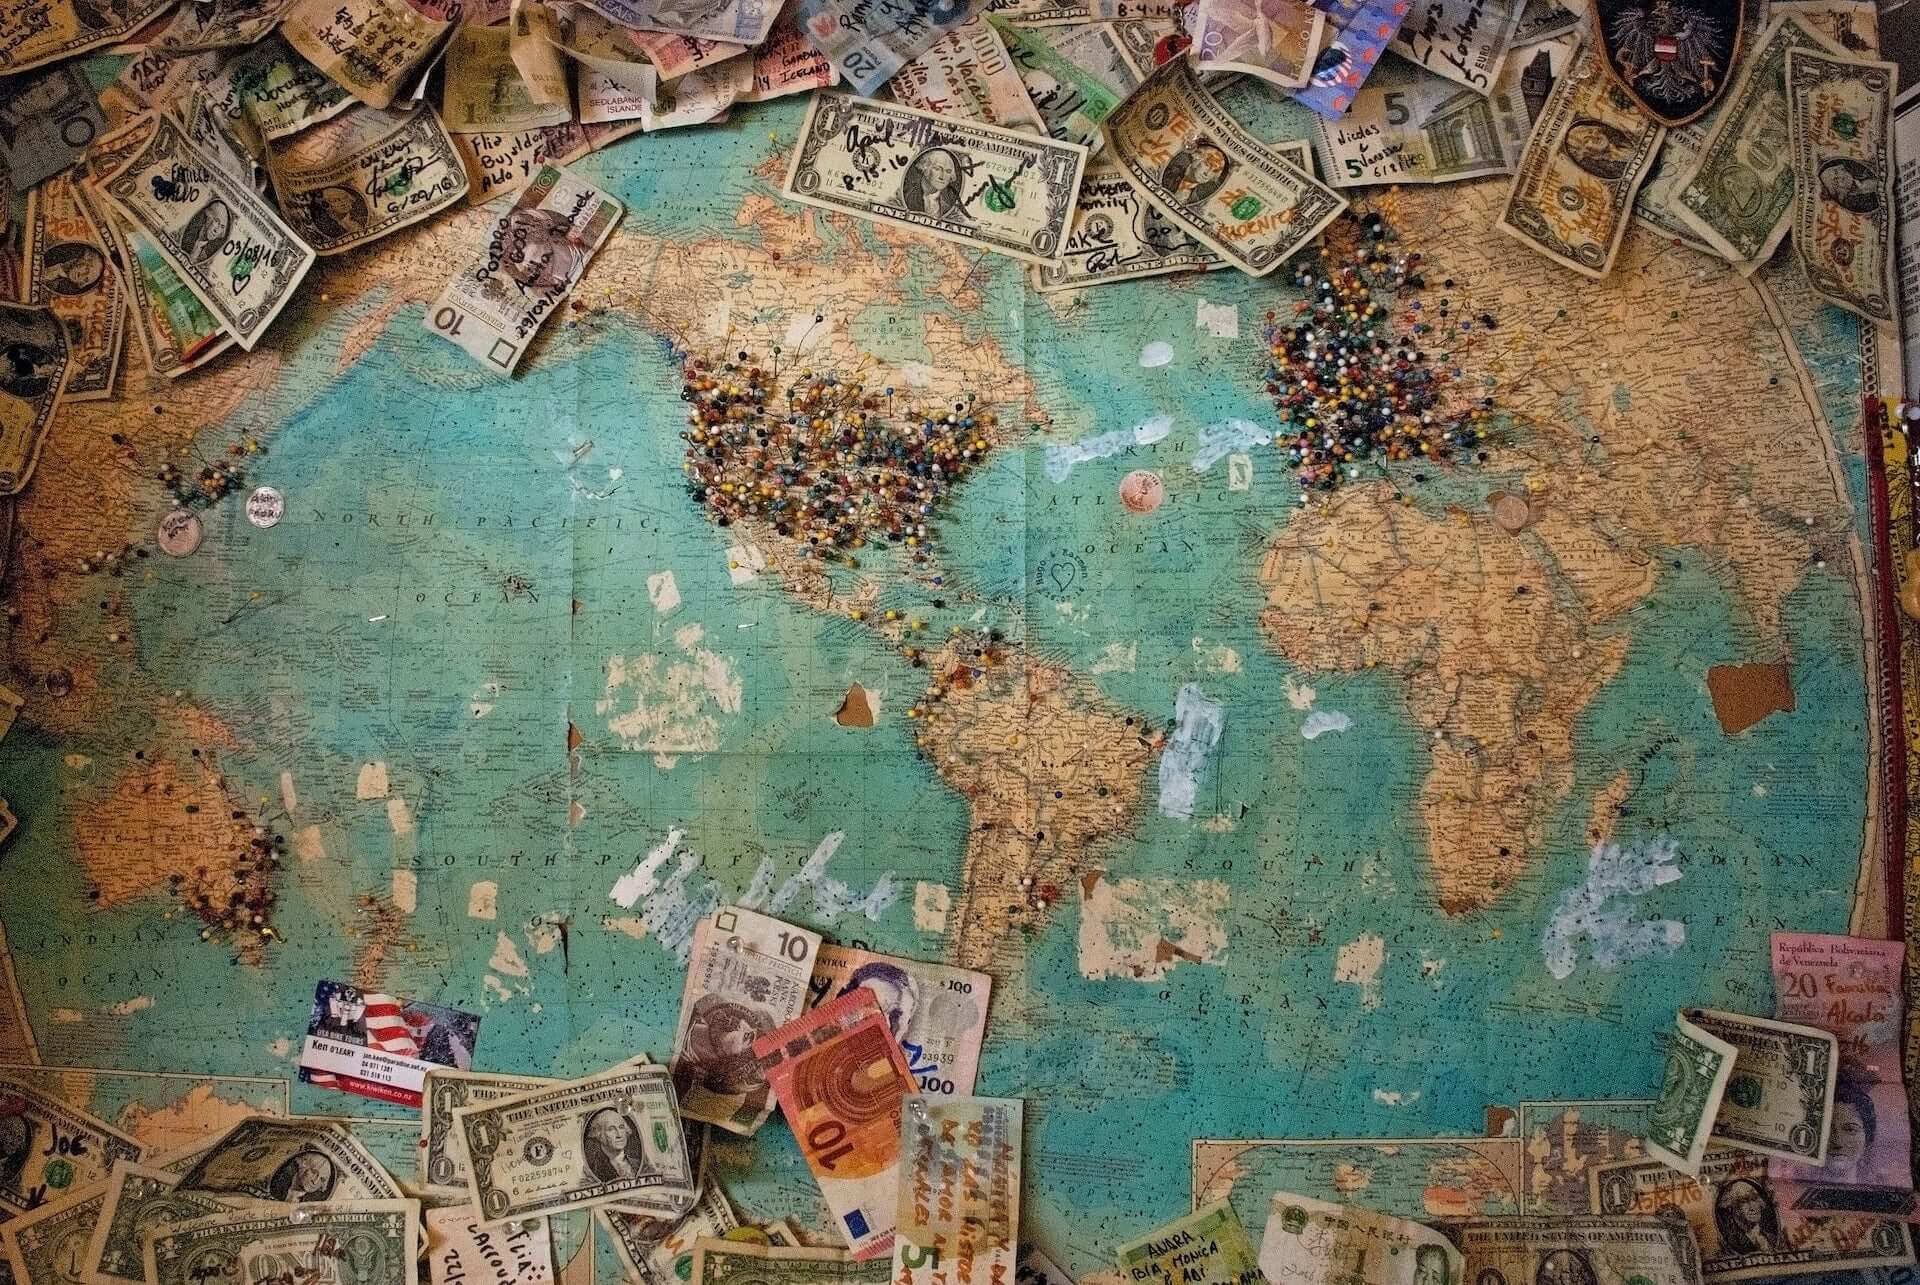 A map of the world surrounded by currency, tickets, and other trinkets.